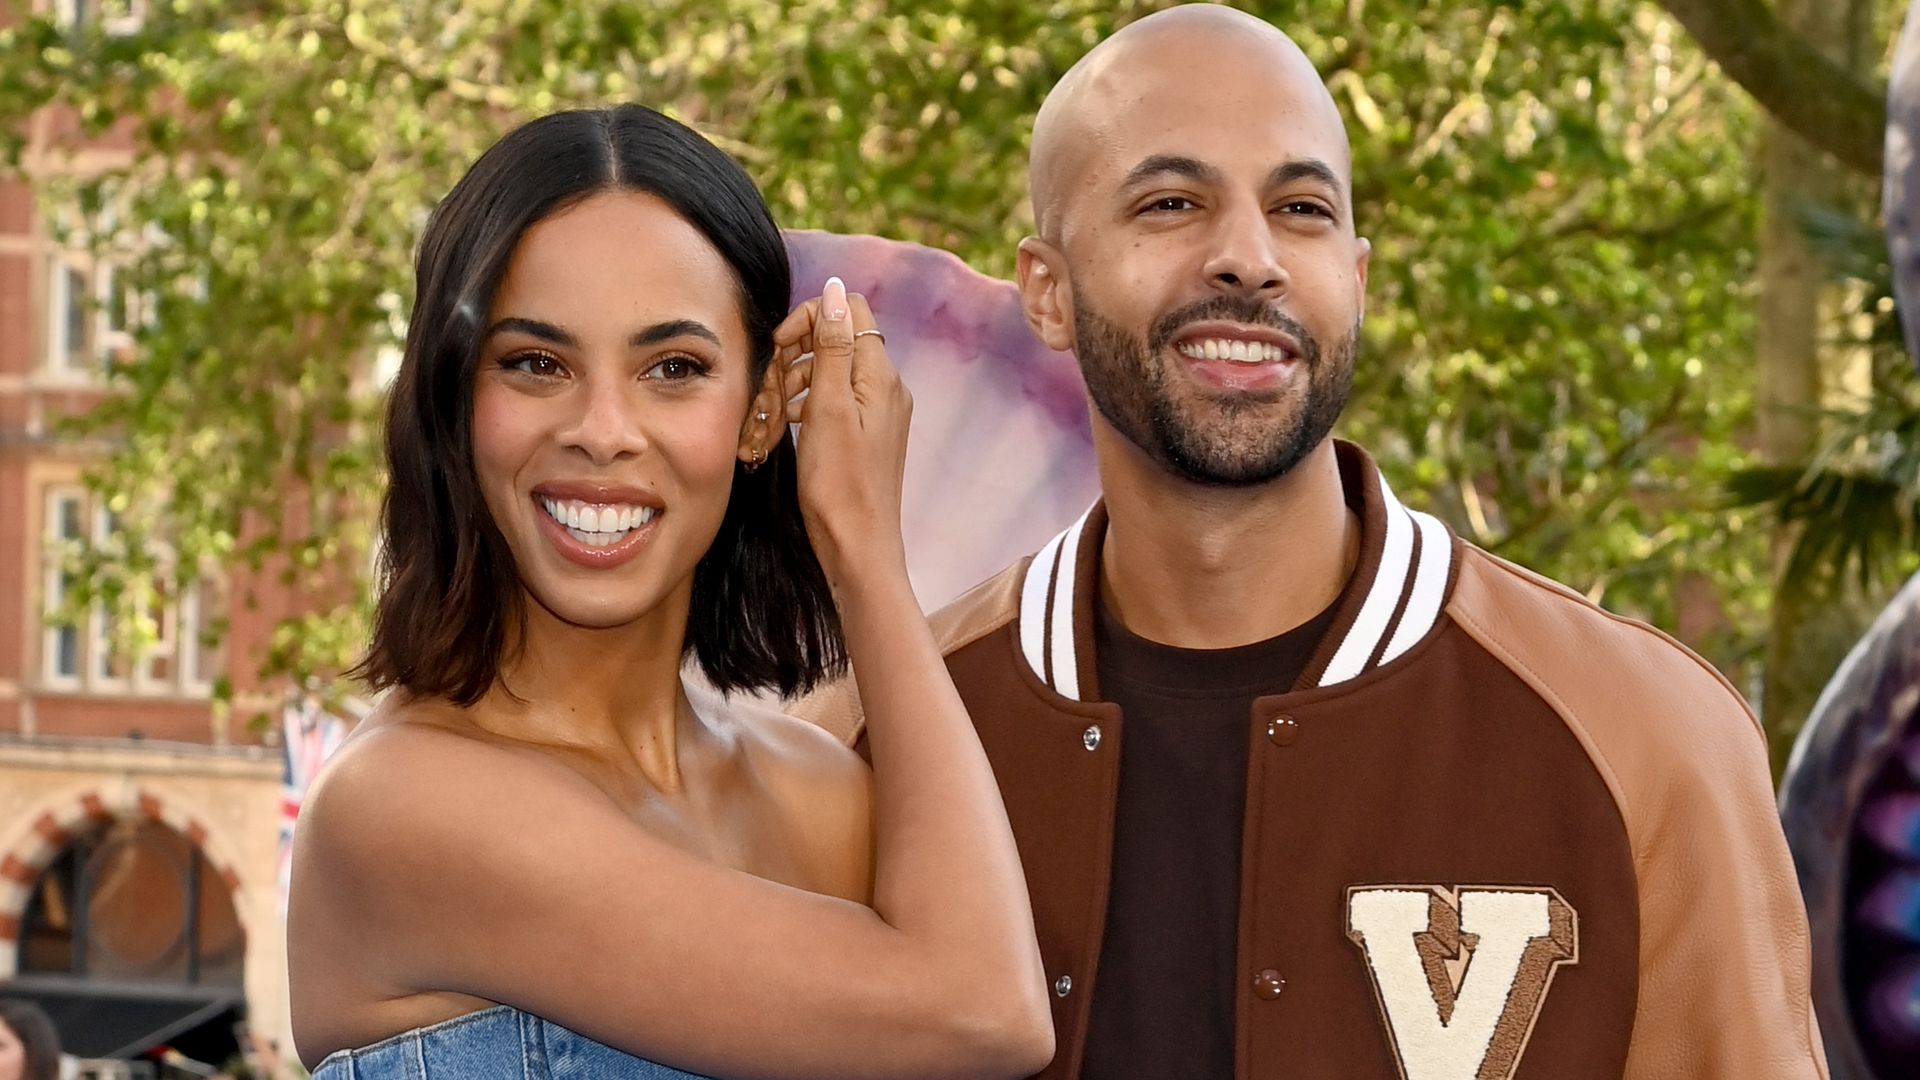 Rochelle Humes' 2 £360k engagement rings from Marvin compared | HELLO!